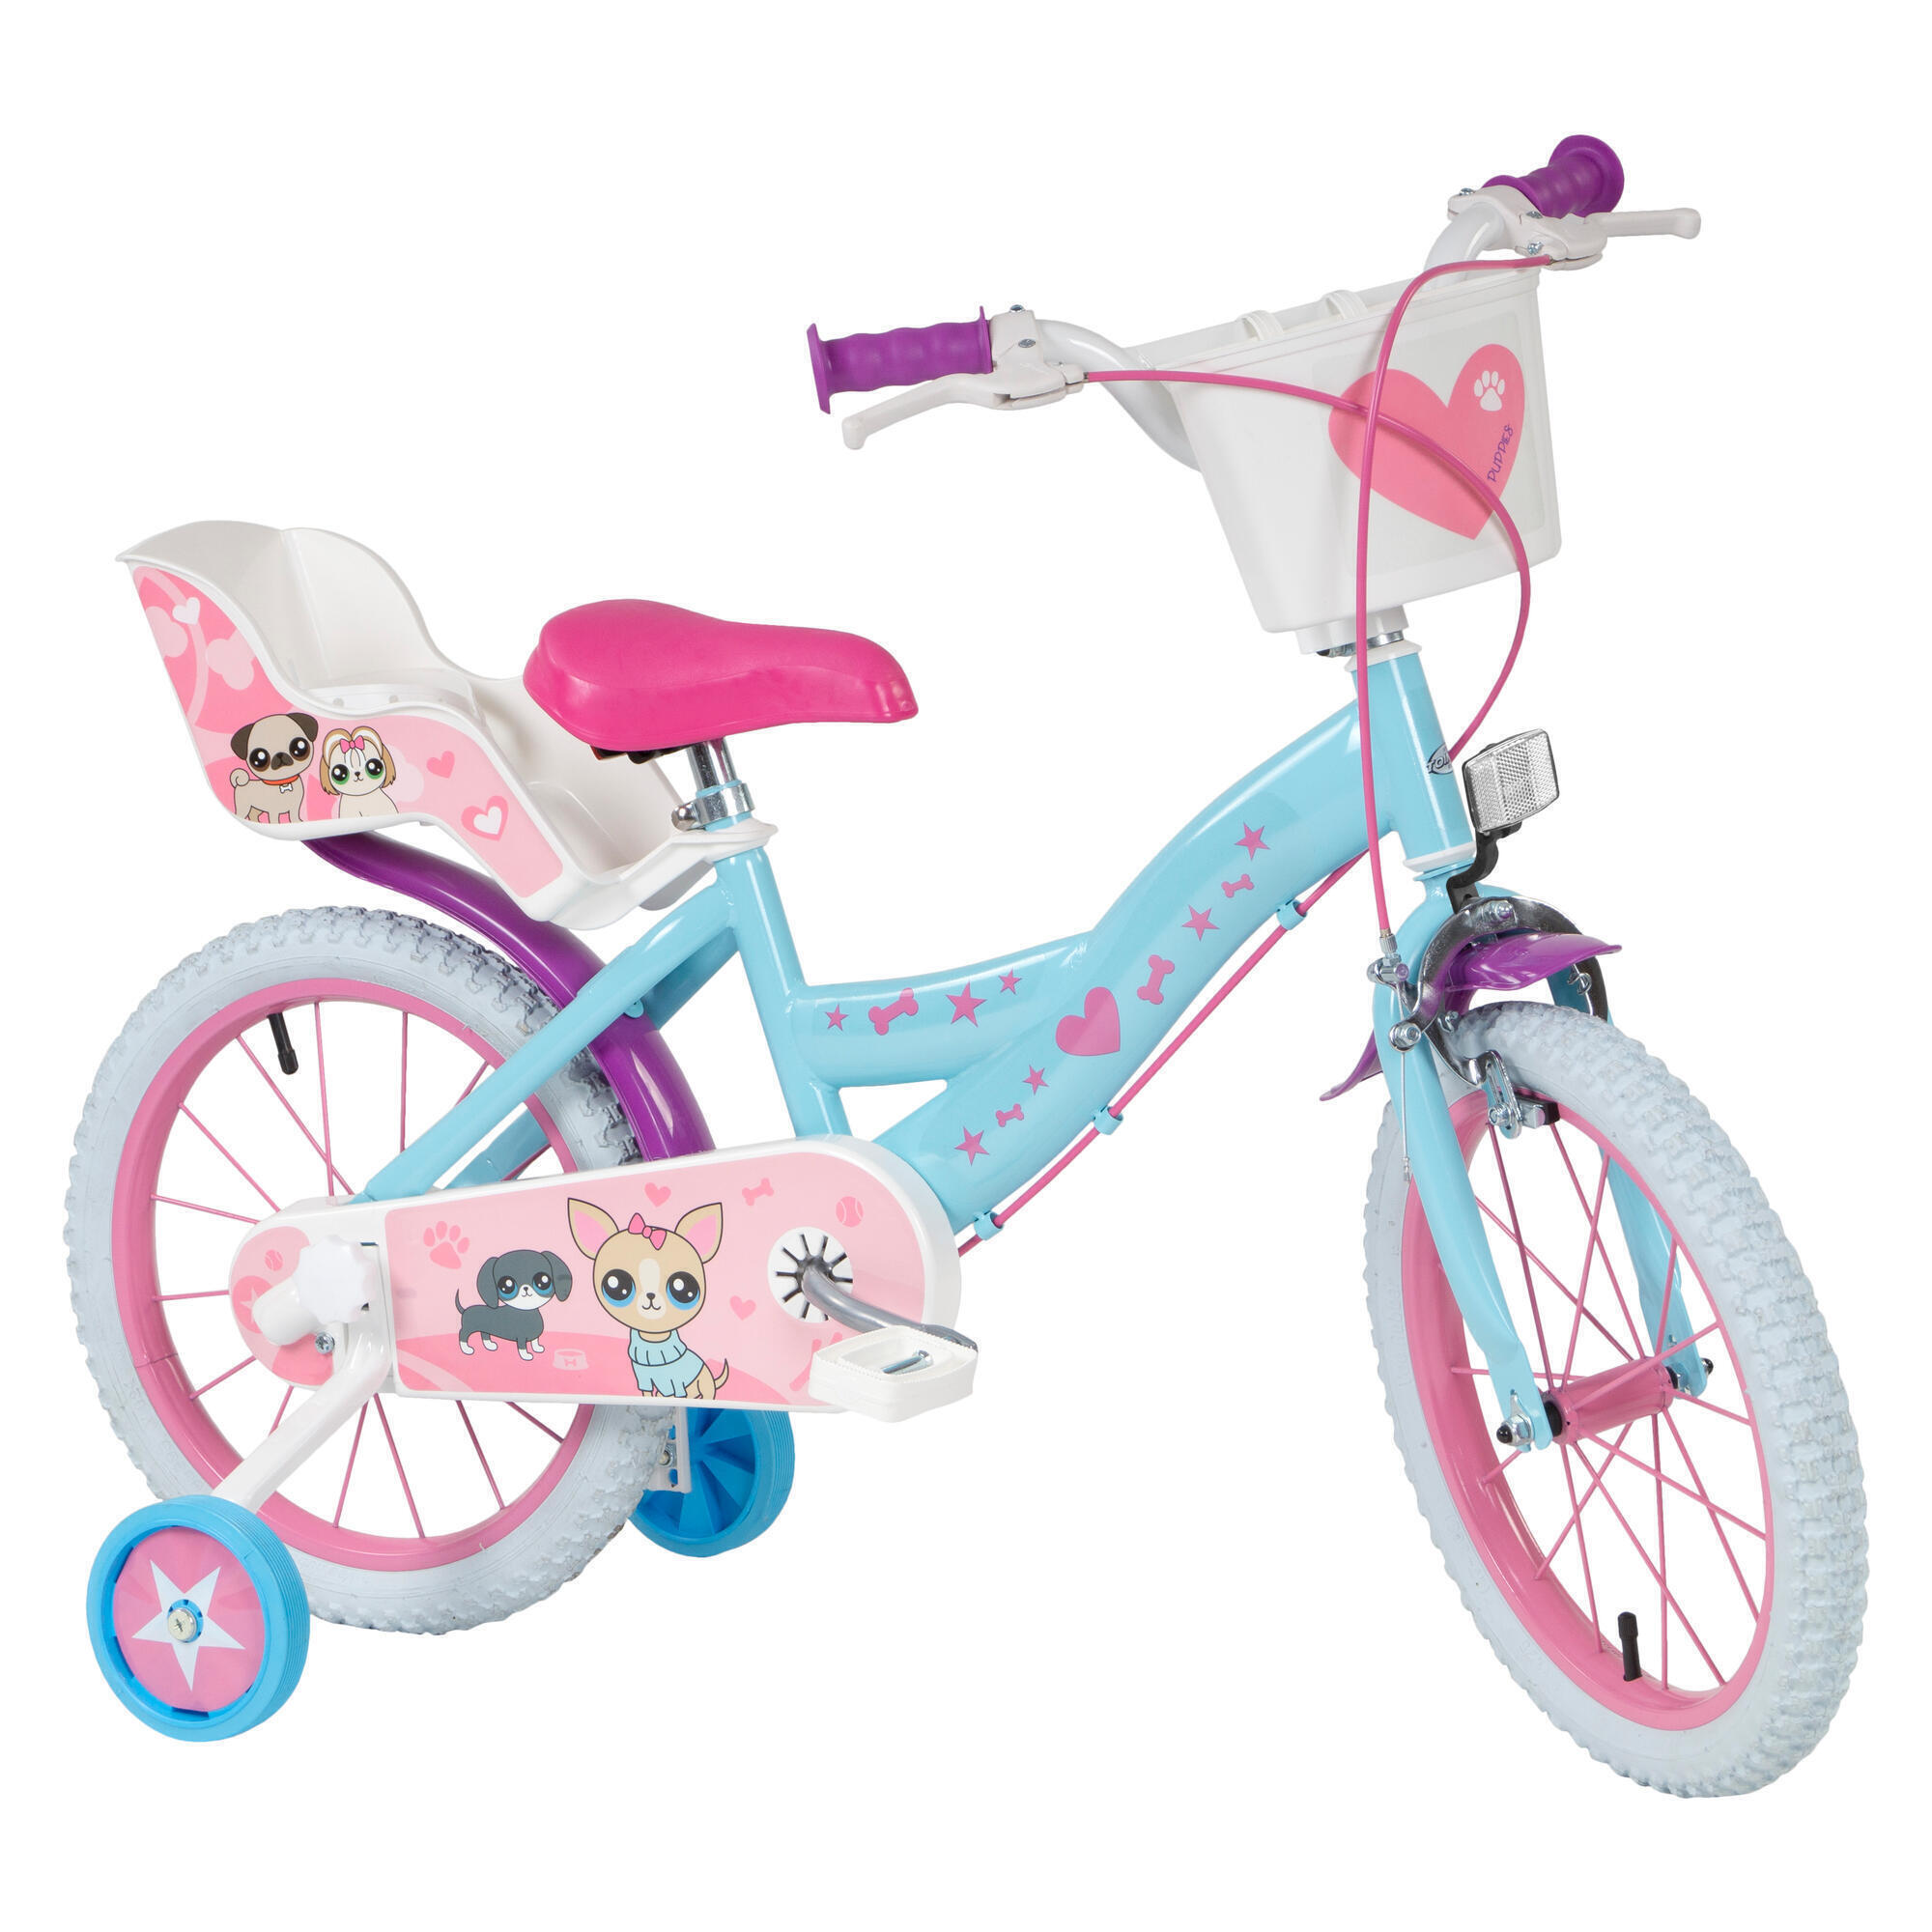 Pets 16" Bicycle 1/5